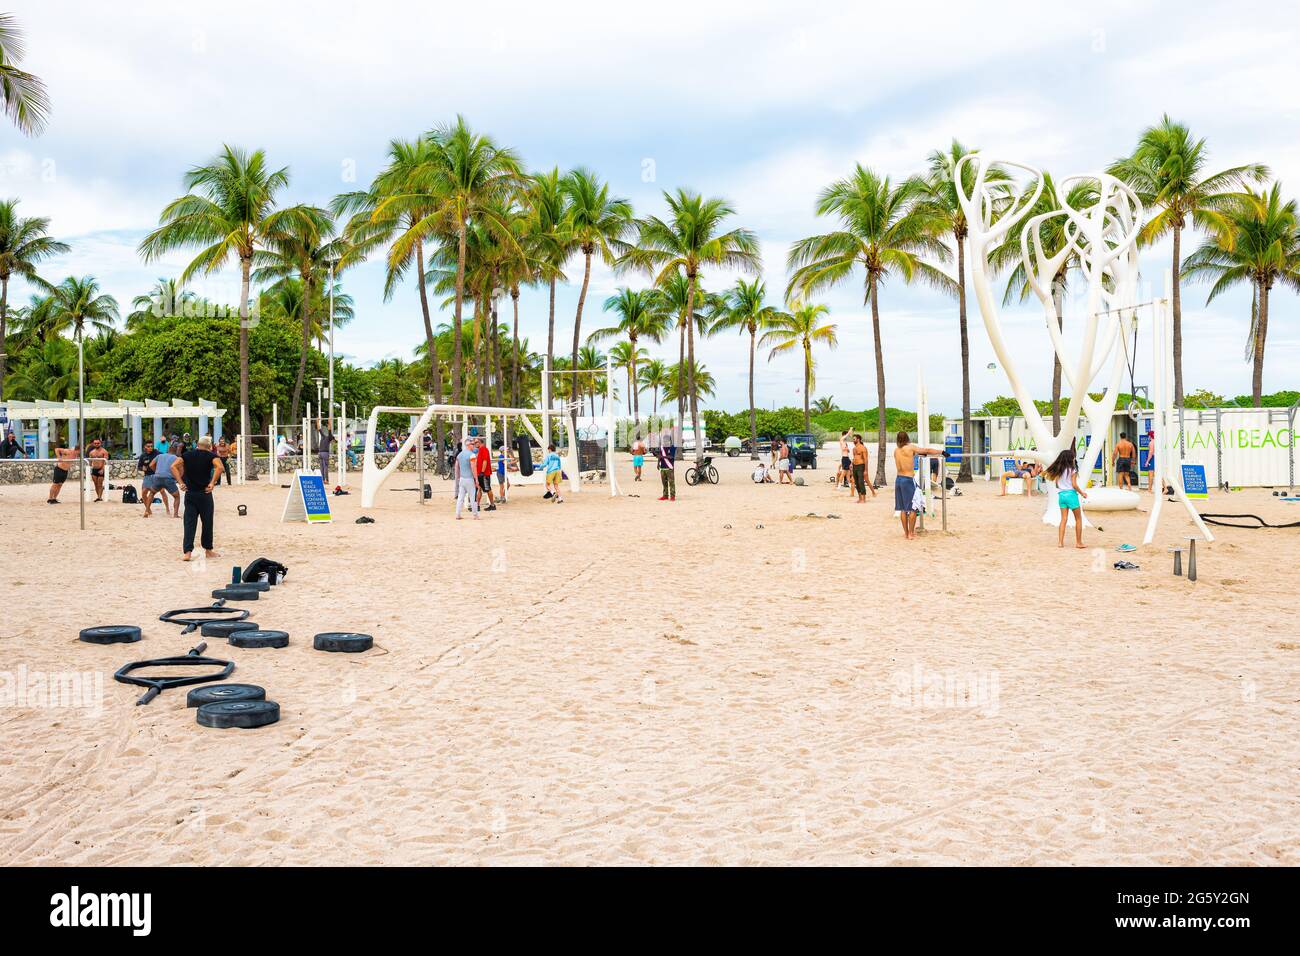 Miami Beach, USA - January 17, 2021: South beach gym with muscular men working out at outdoor fitness station, Muscle Beach, and Lummus Park promenade Stock Photo